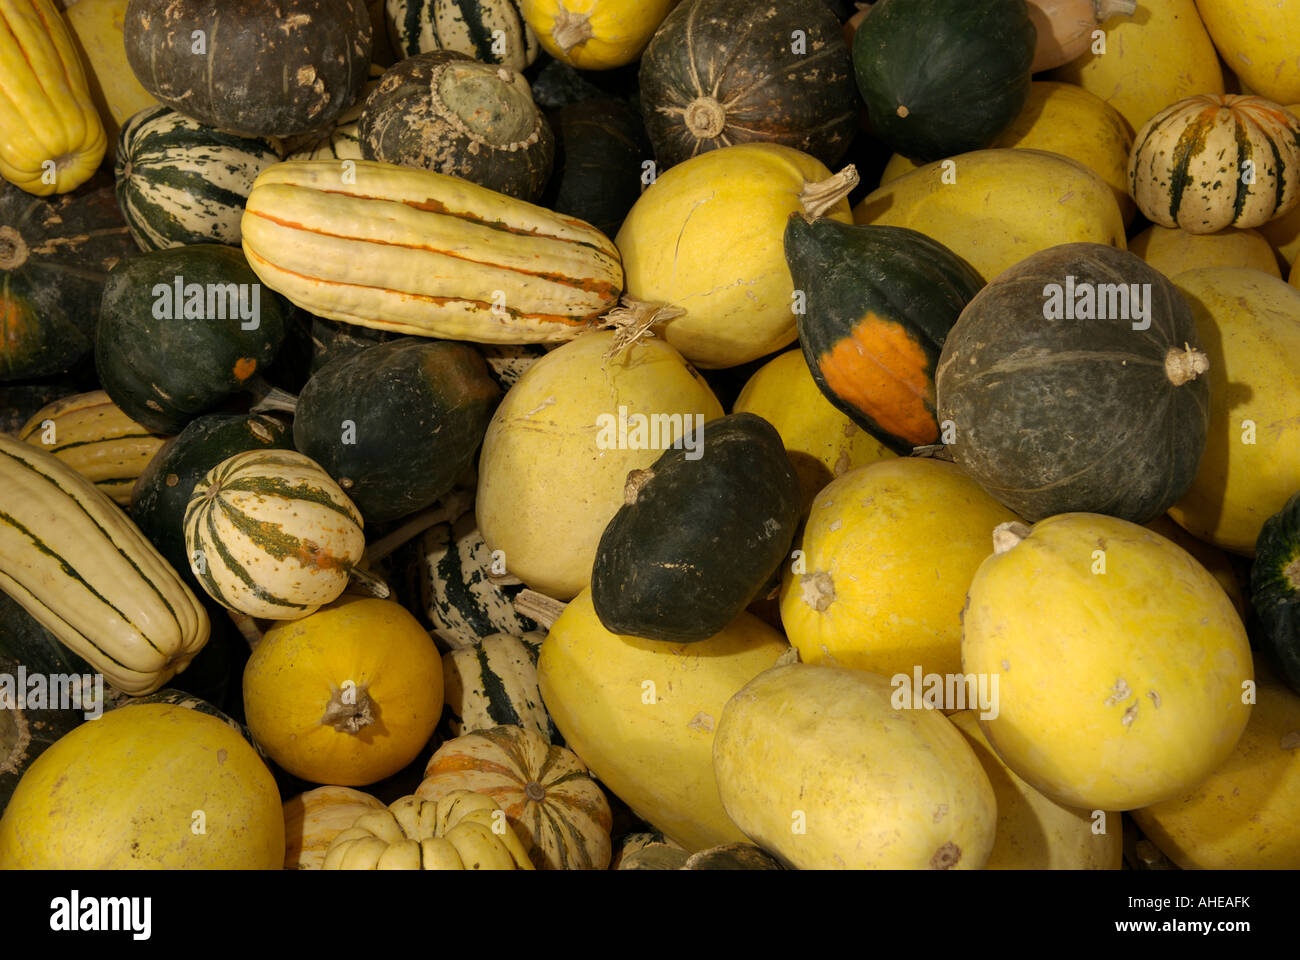 Pile of gourds for sale at a local roadside fruit stand in the farm country of Eastern Washington State, United States Stock Photo